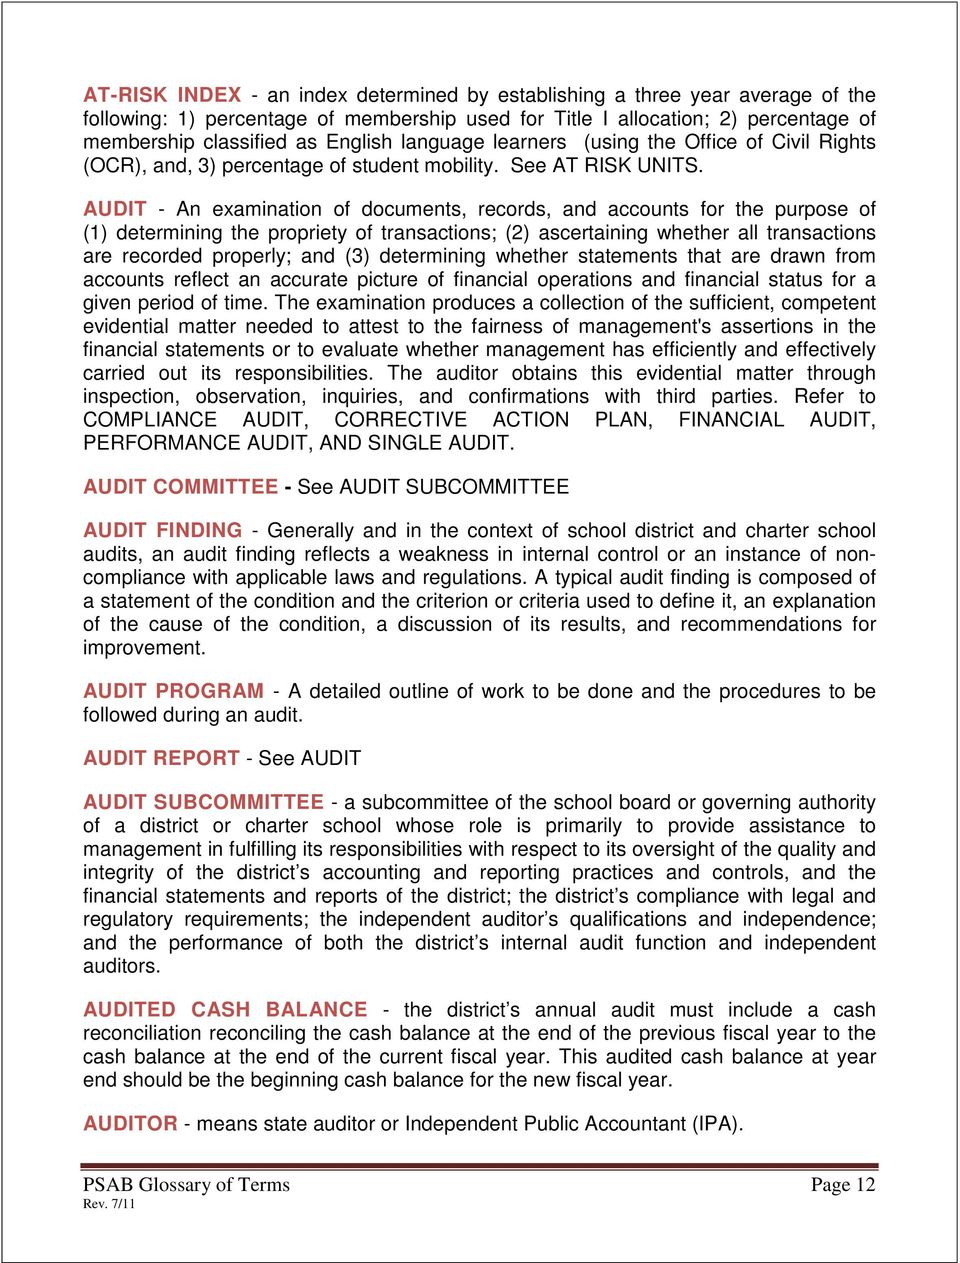 AUDIT - An examination of documents, records, and accounts for the purpose of (1) determining the propriety of transactions; (2) ascertaining whether all transactions are recorded properly; and (3)